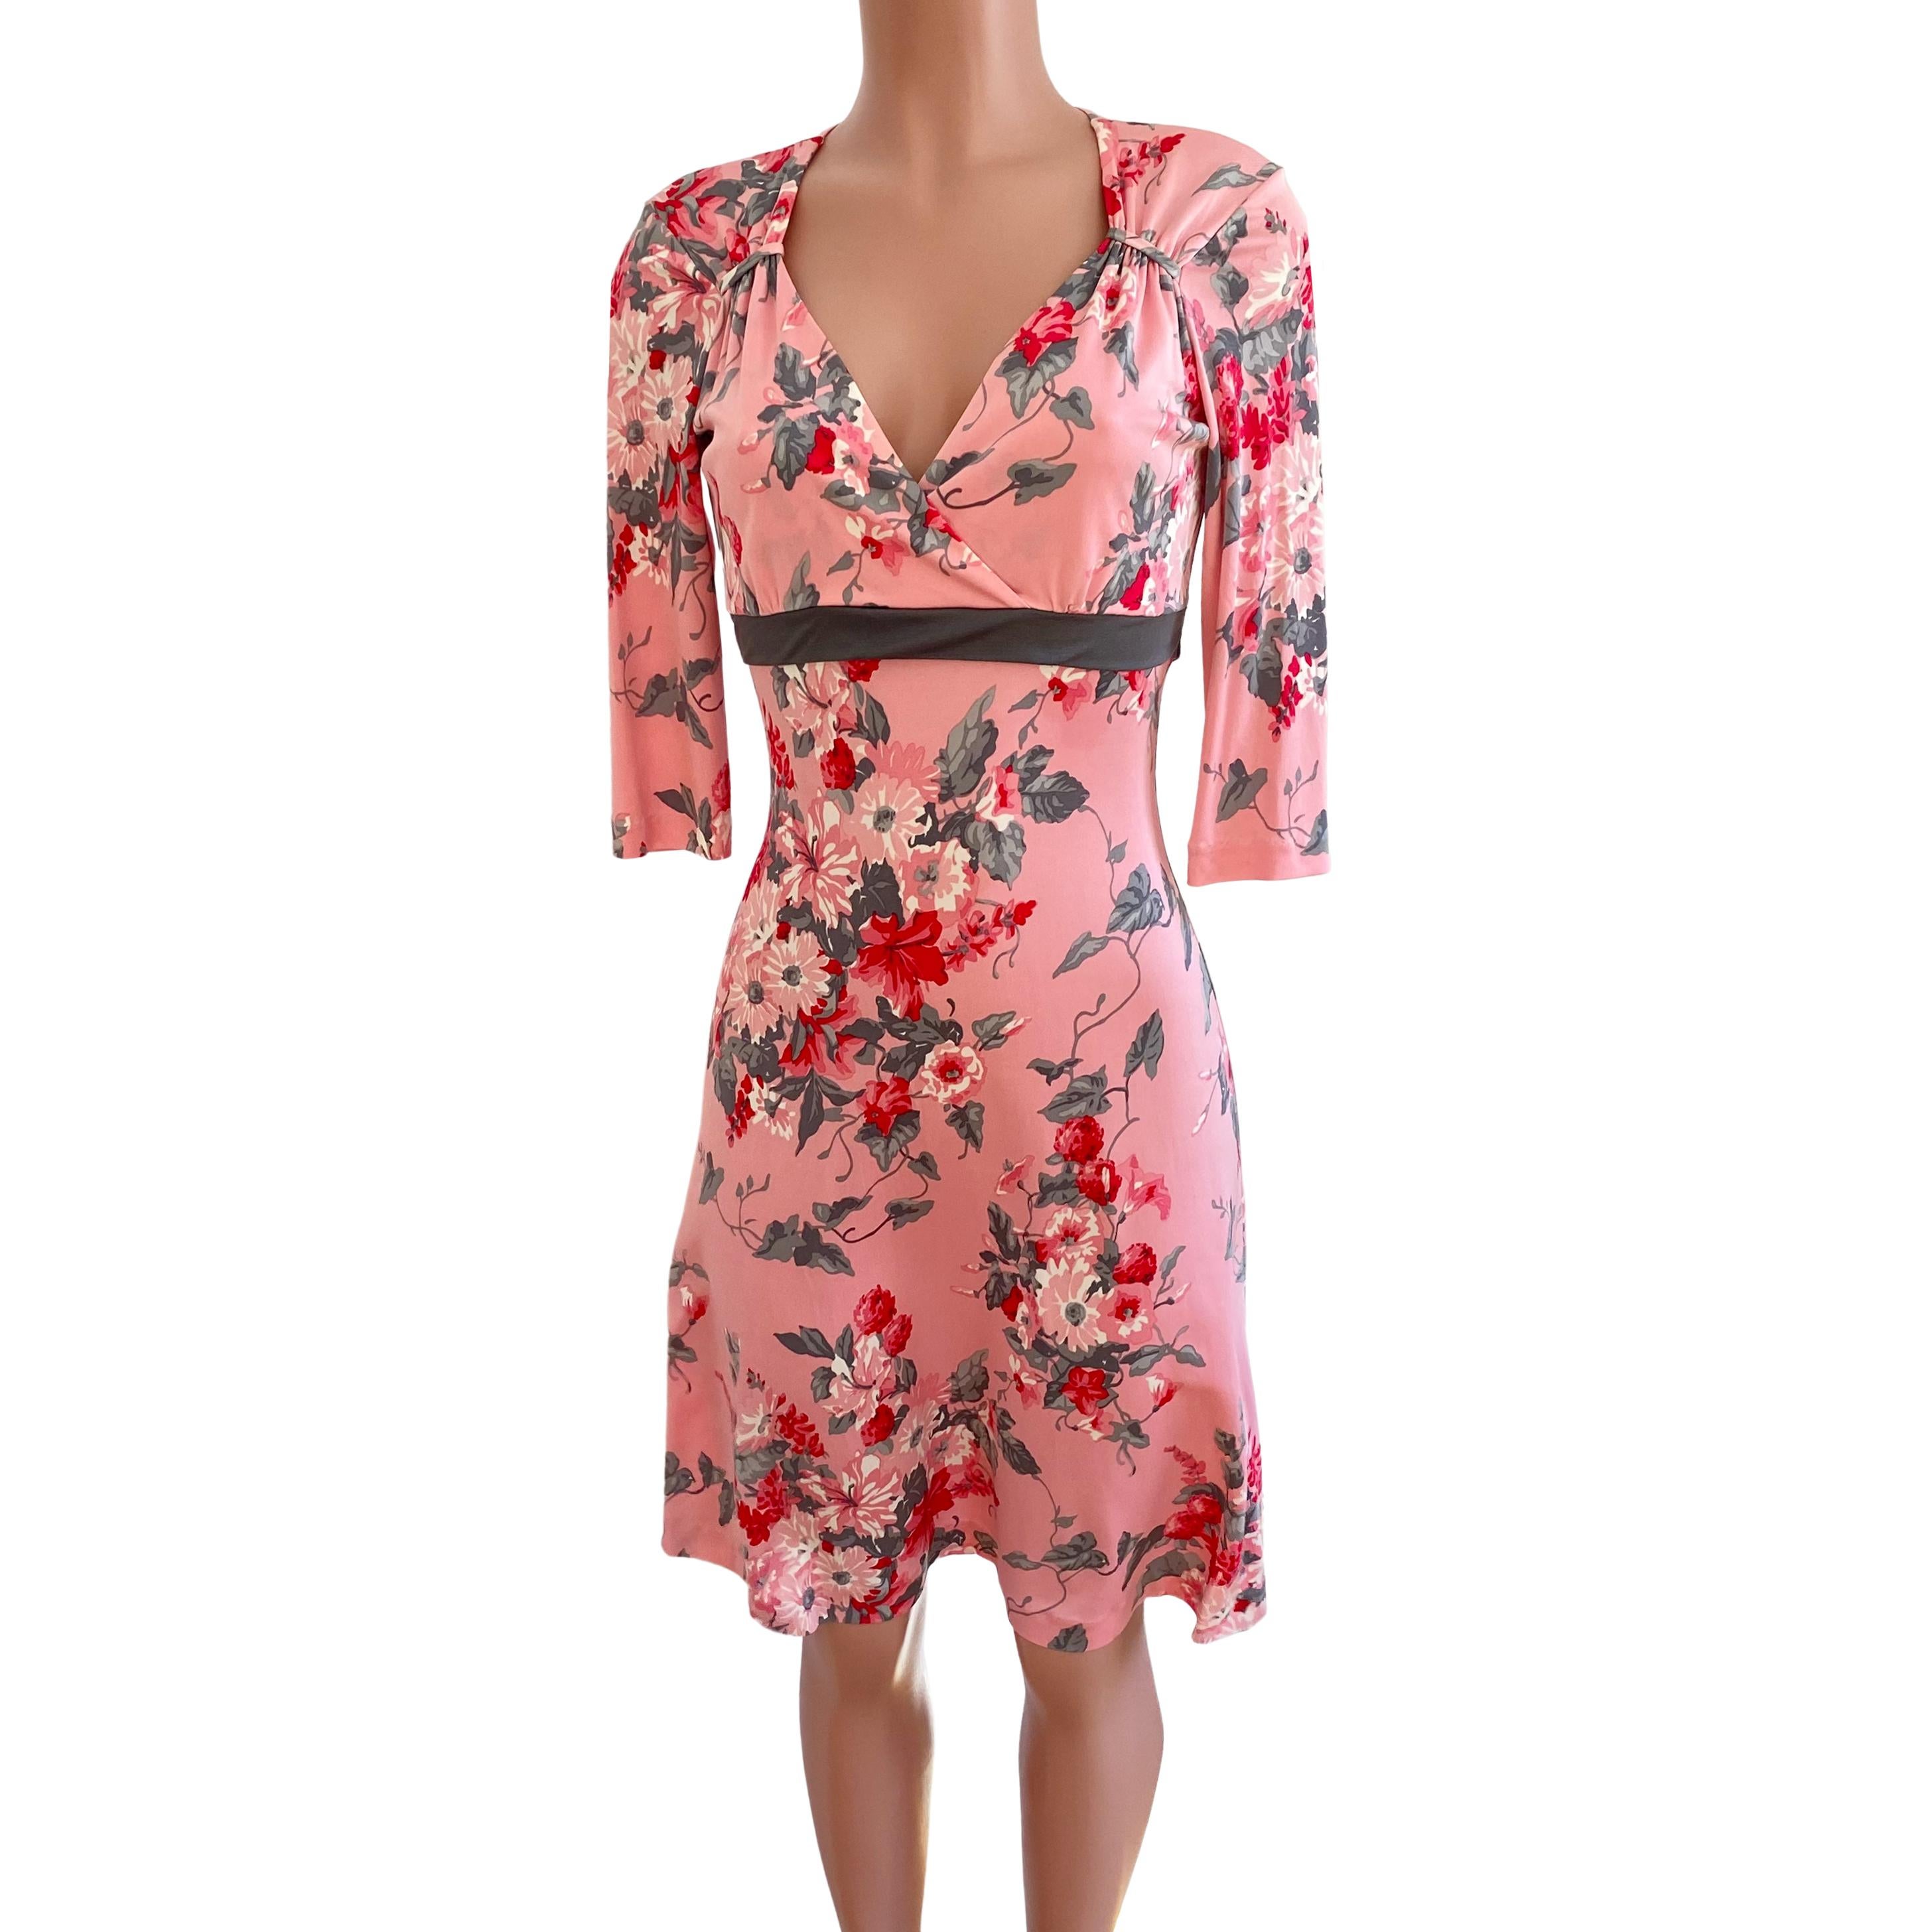 Pretty pink mock wrap dress with flared skirt and ties at back.
3/4 sleeves.
Approximately 41